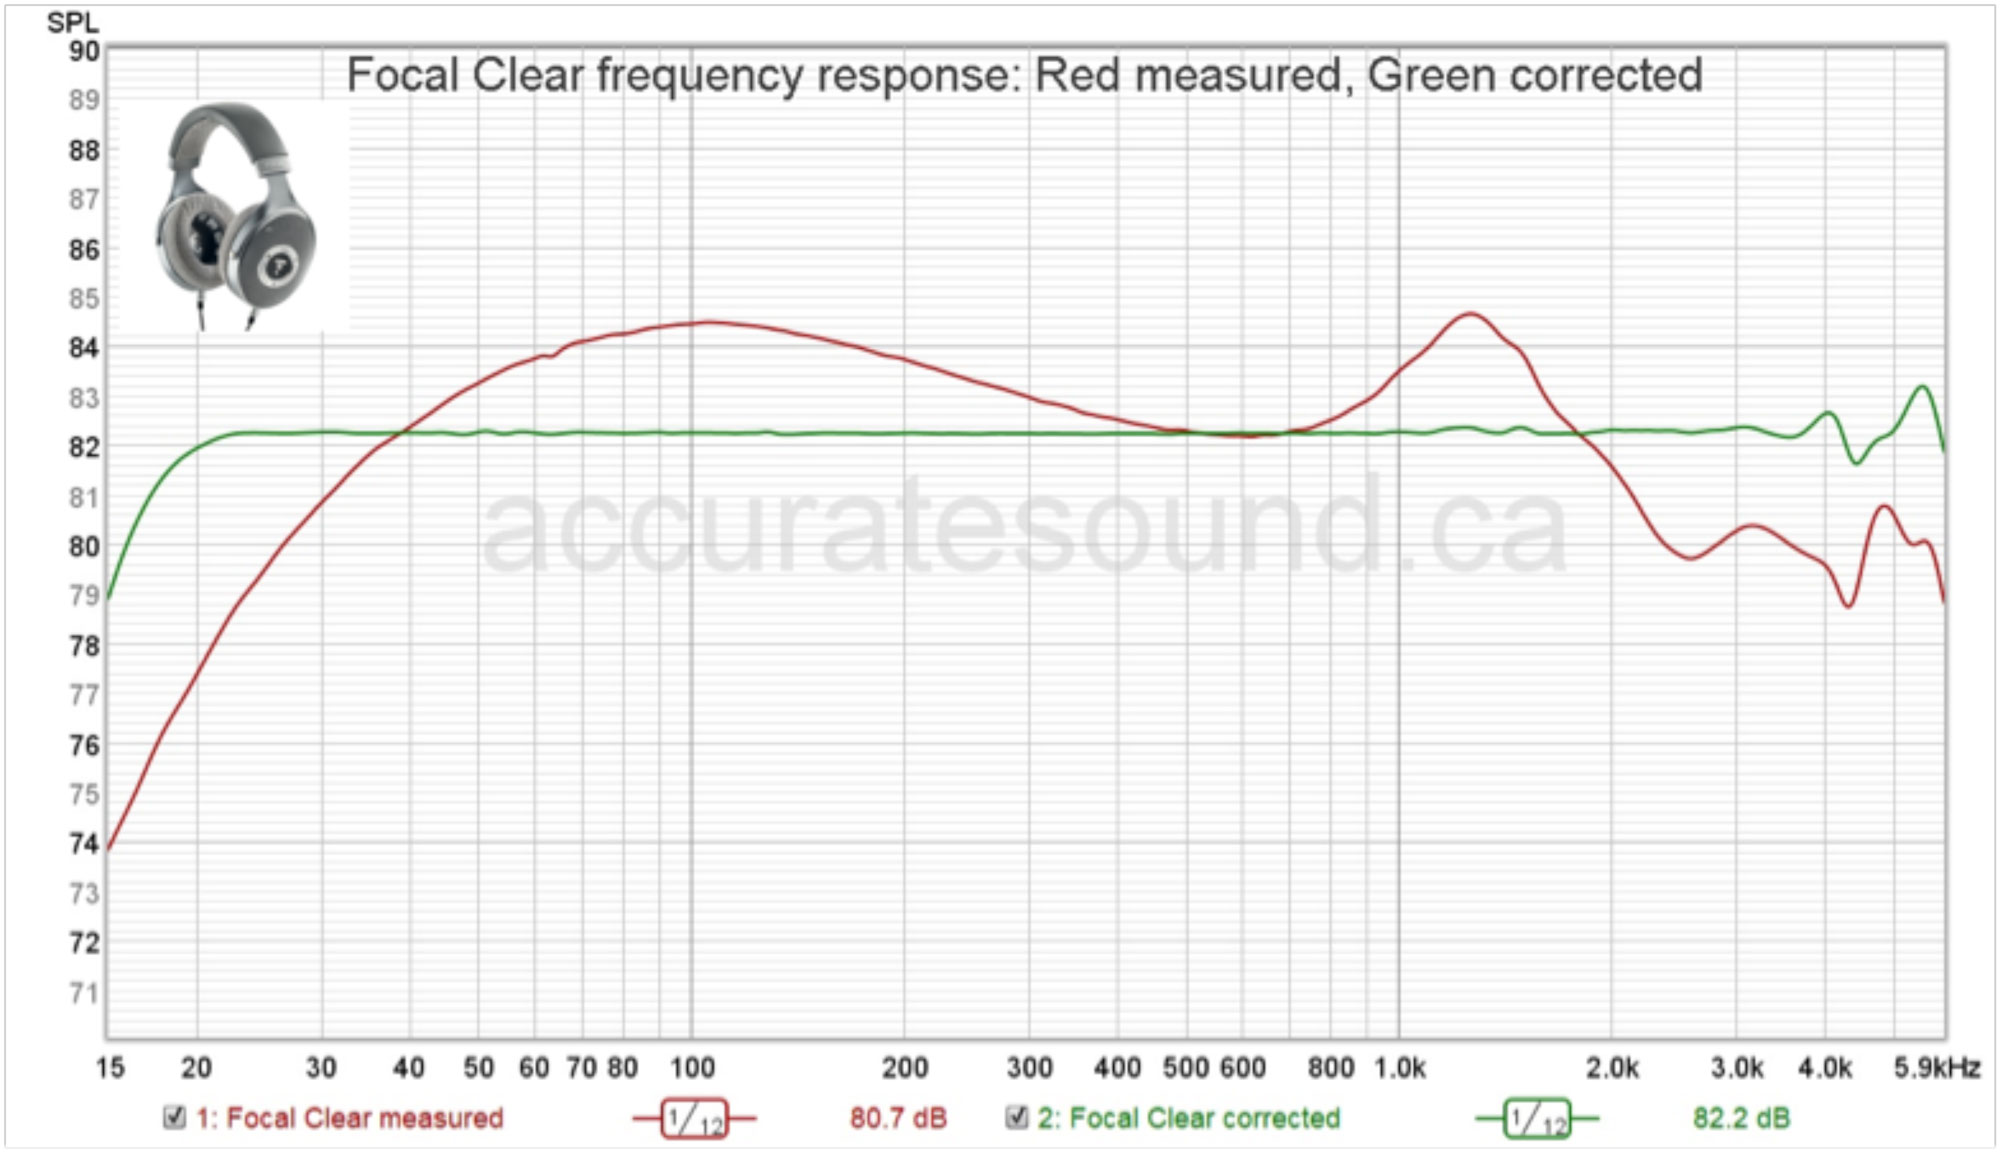 Focal Clear frequency